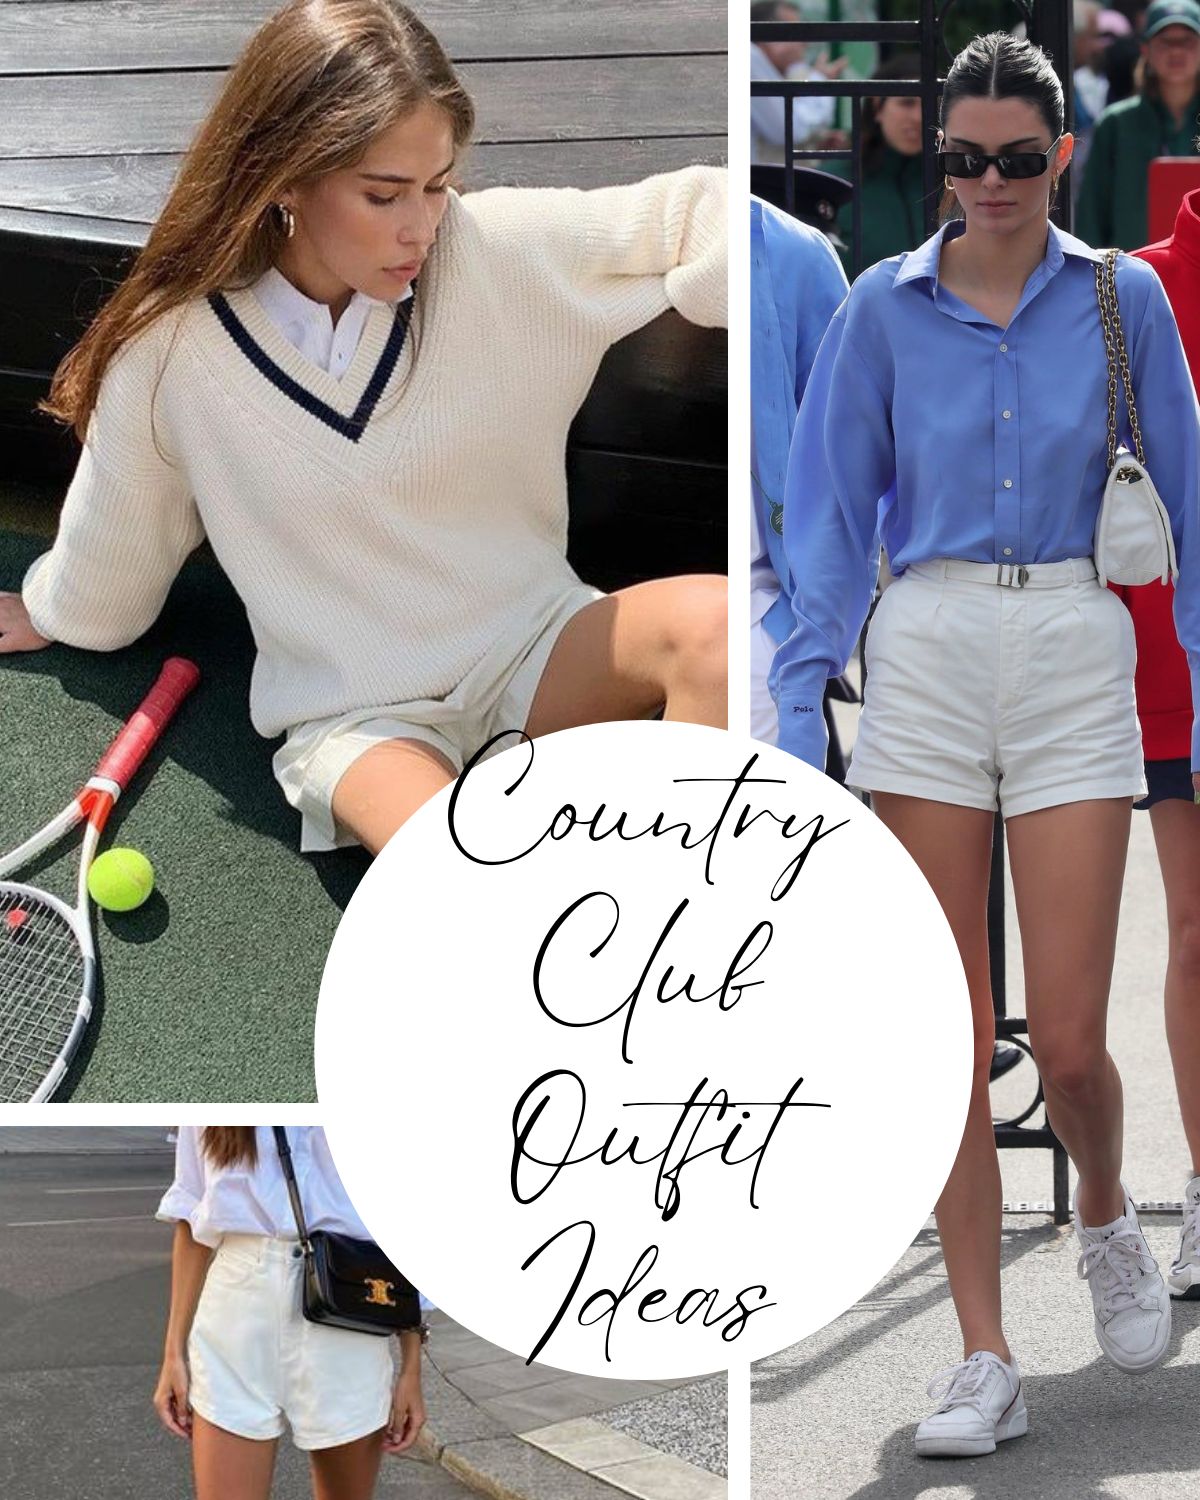 Three women in preppy, clean, professional outfits.